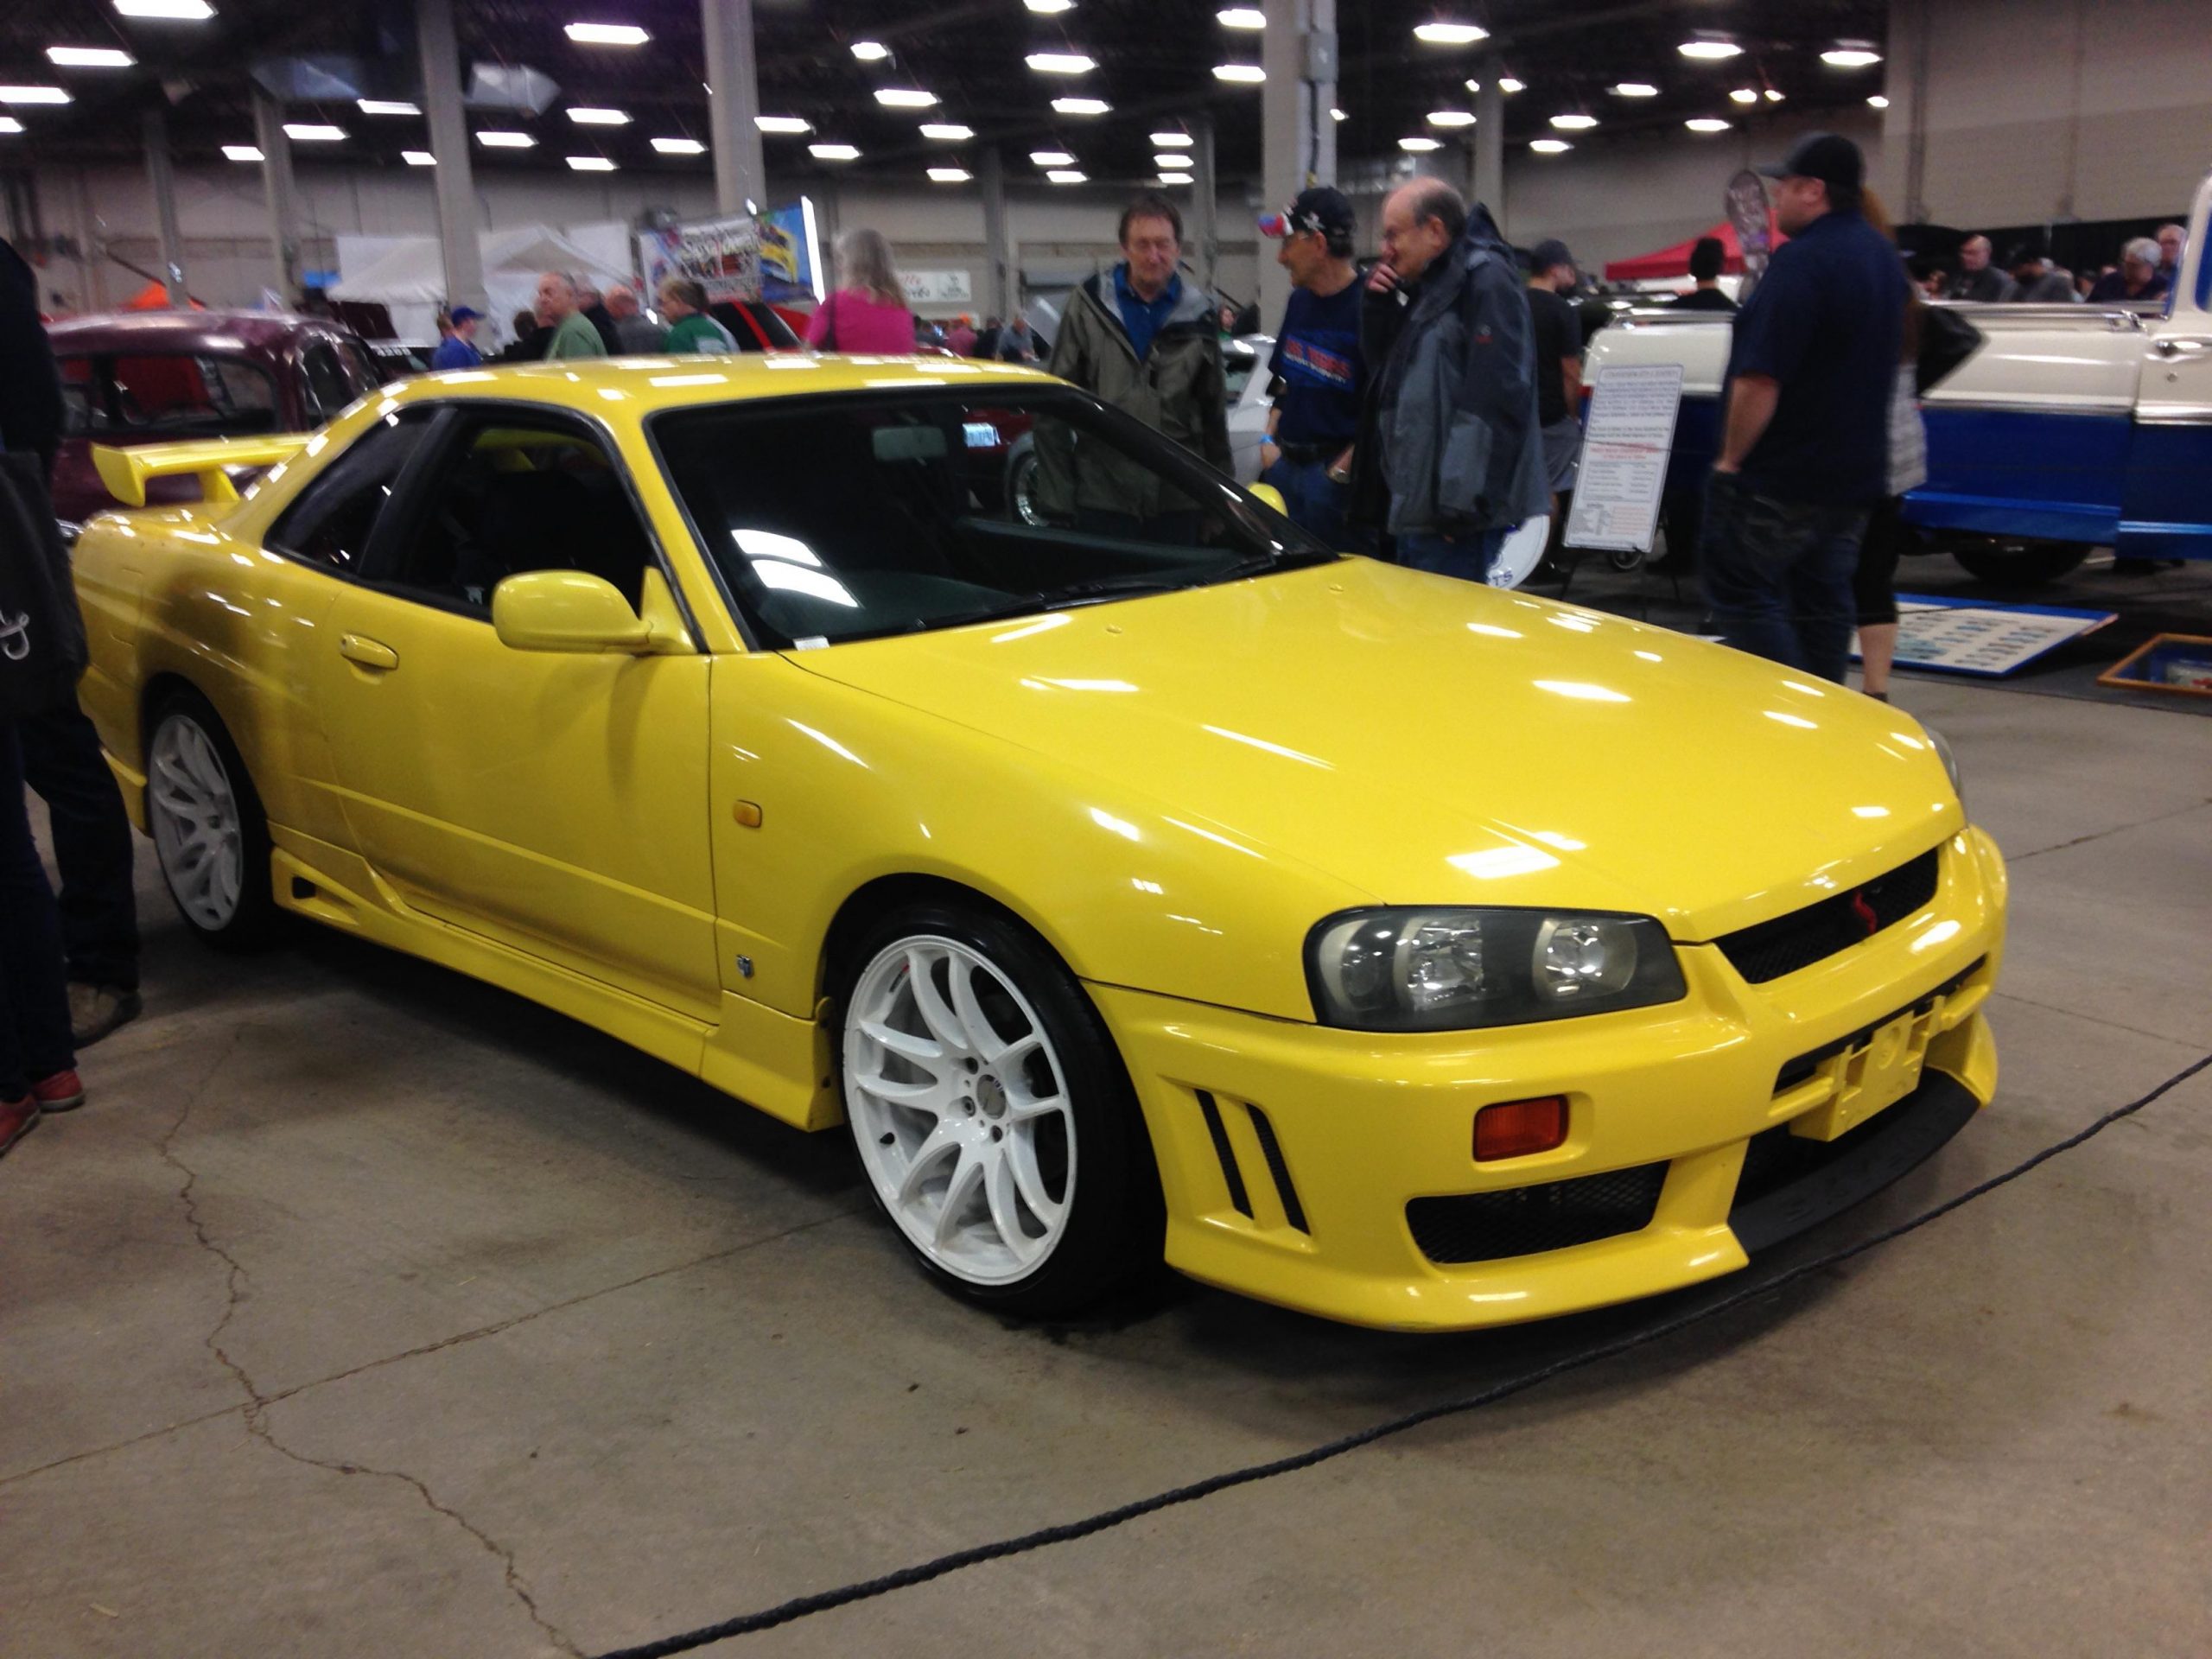 Skyline R34 – pic i took at a car show a long while back